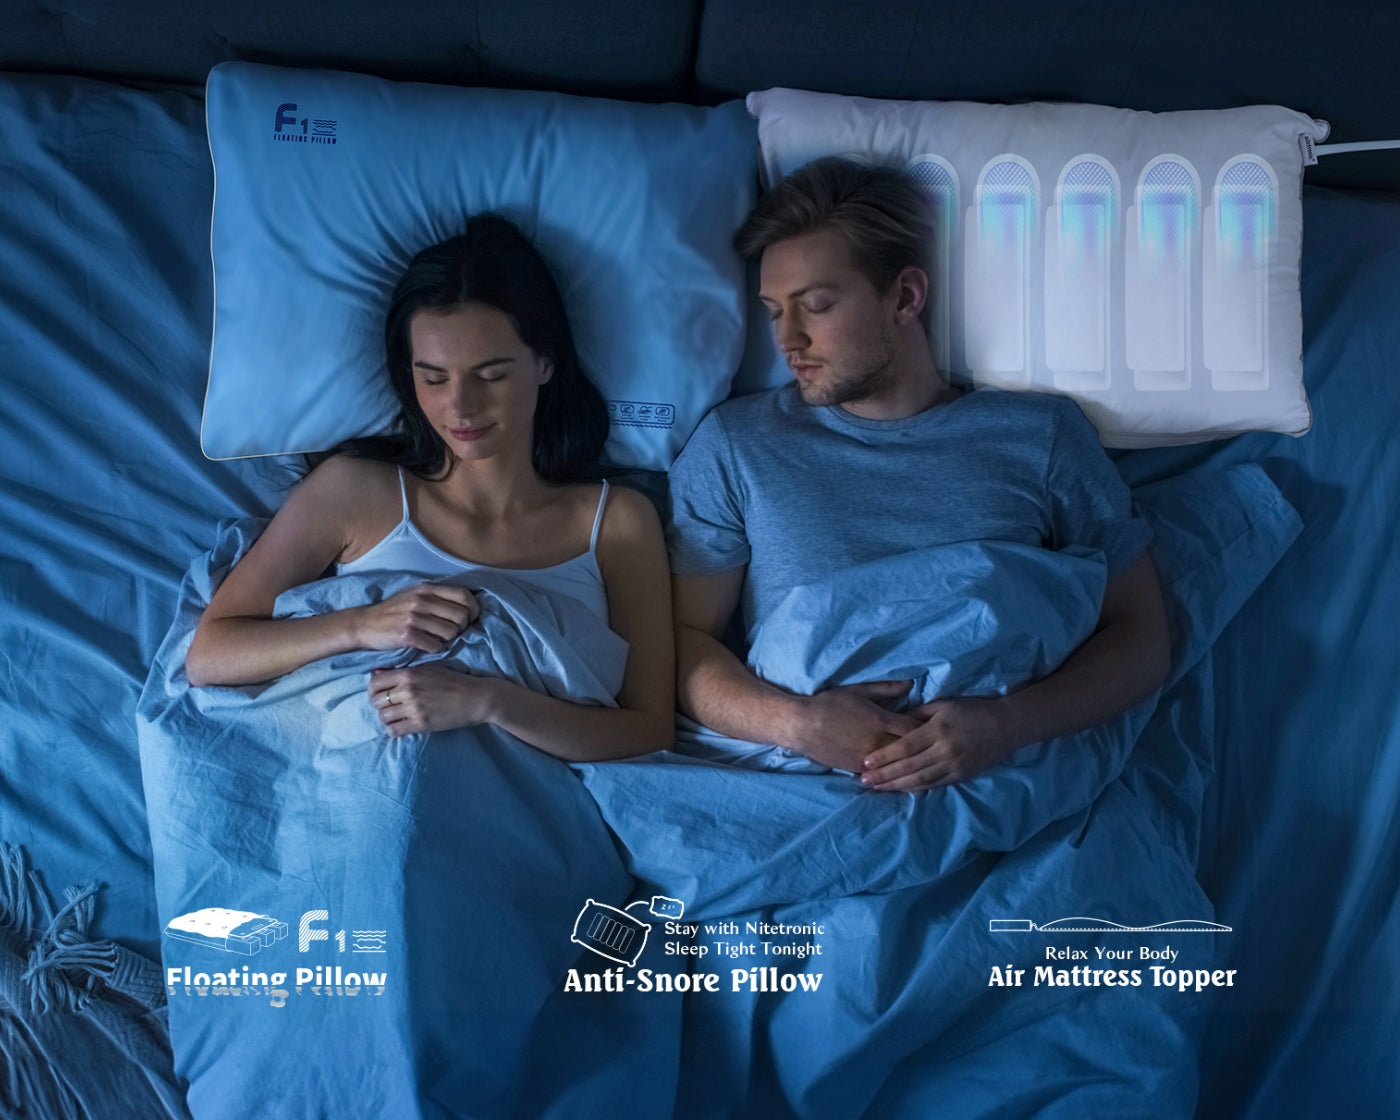 Choose a suitable sleep breathing pillow -The most effective physical anti-snoring